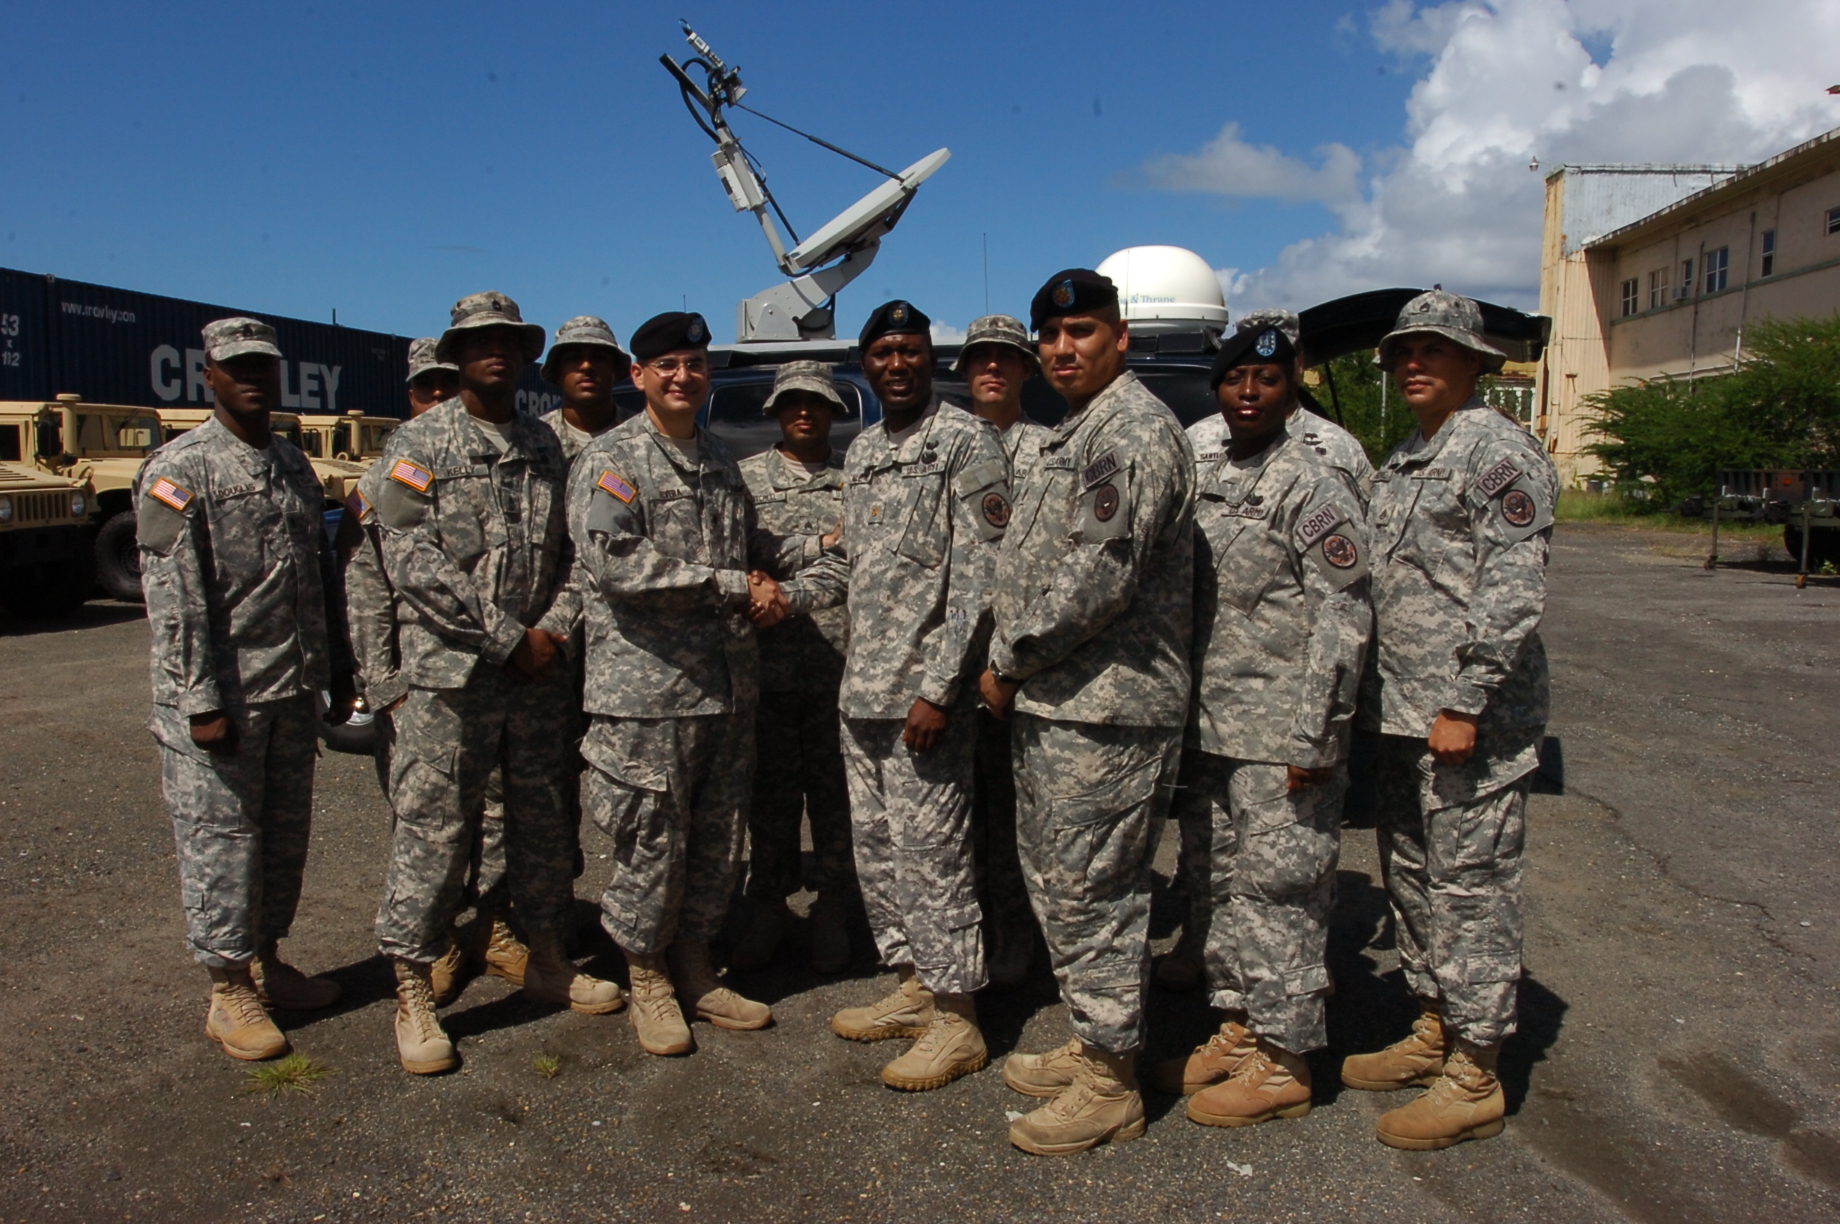 Puerto Rico National Guard Lt. Col. Carlos Rivera (center) thanks V.I. National Guard Maj. Kenneth S. Alleyne and the members of the VING's 23rd Civil Support Troop.